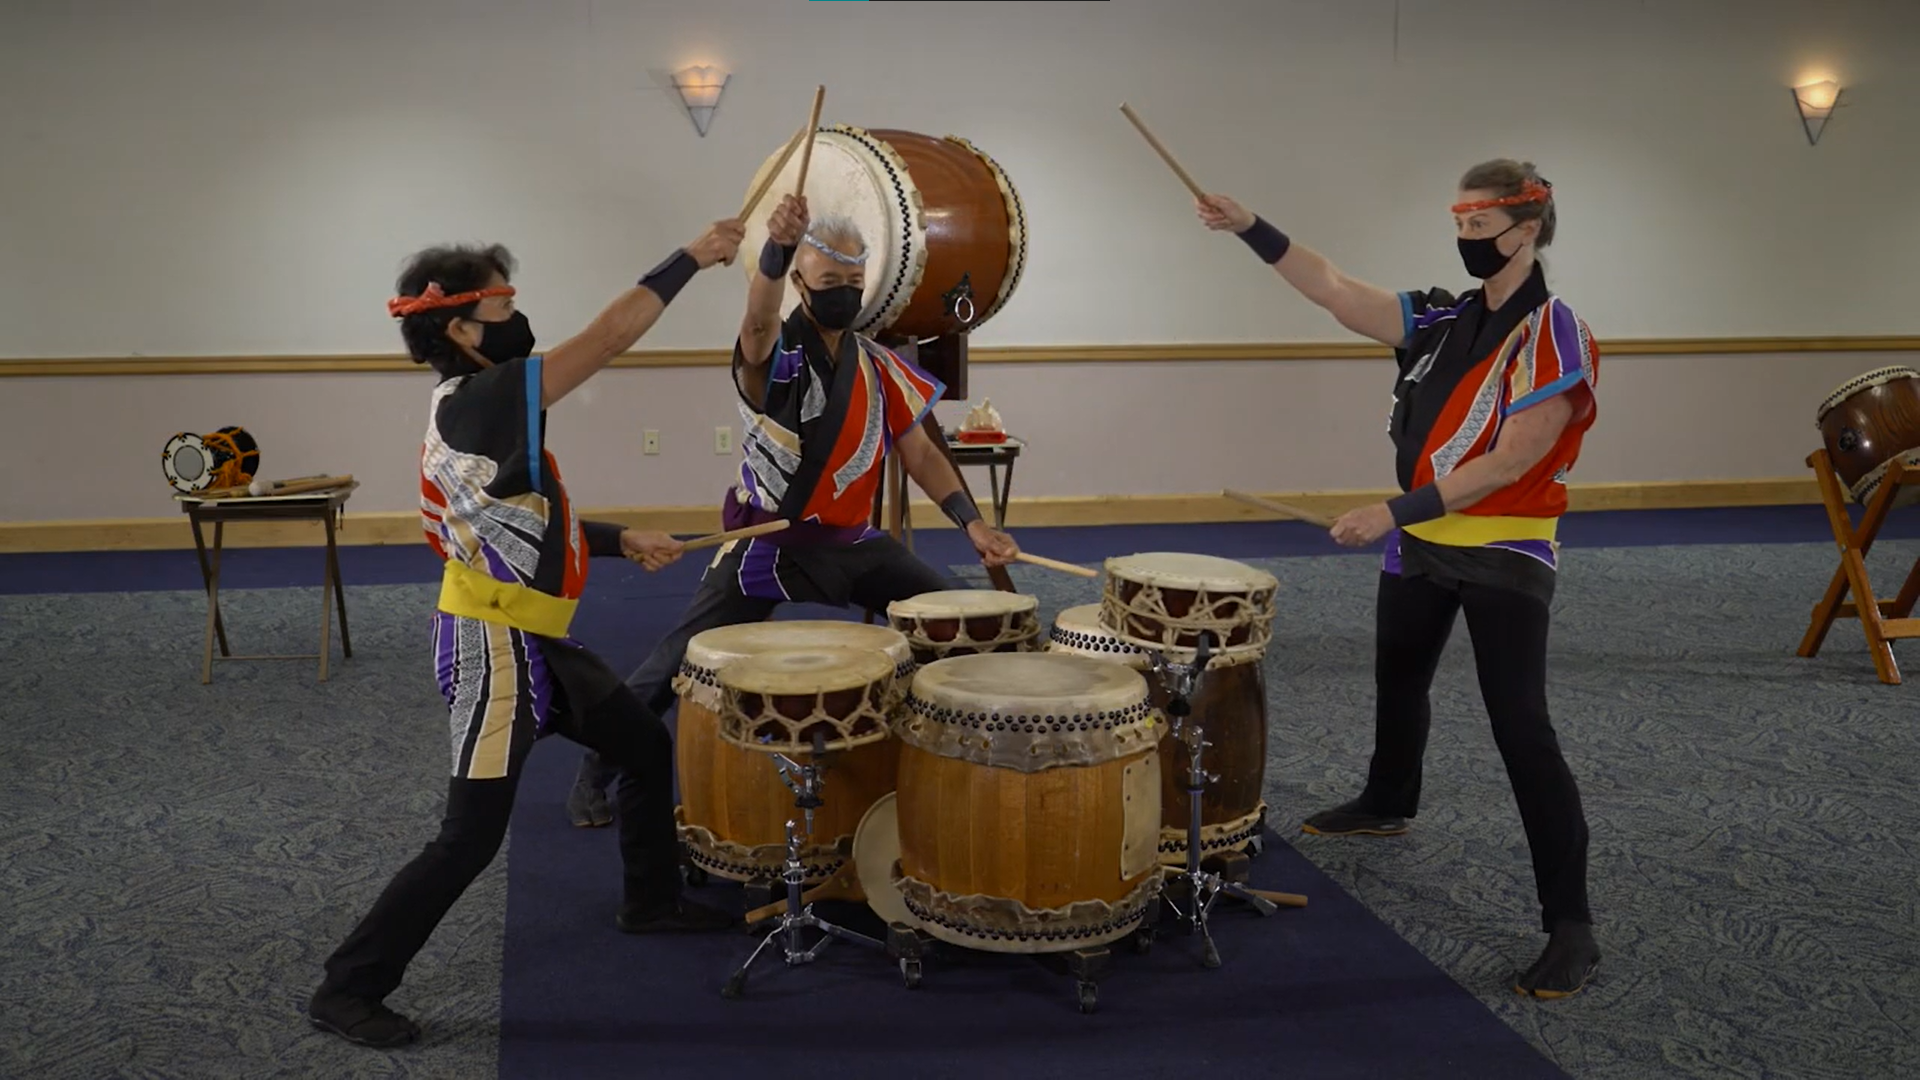  Instructor Kenny Endo and members of the Taiko Center of Pacific demonstrate taiko drumming